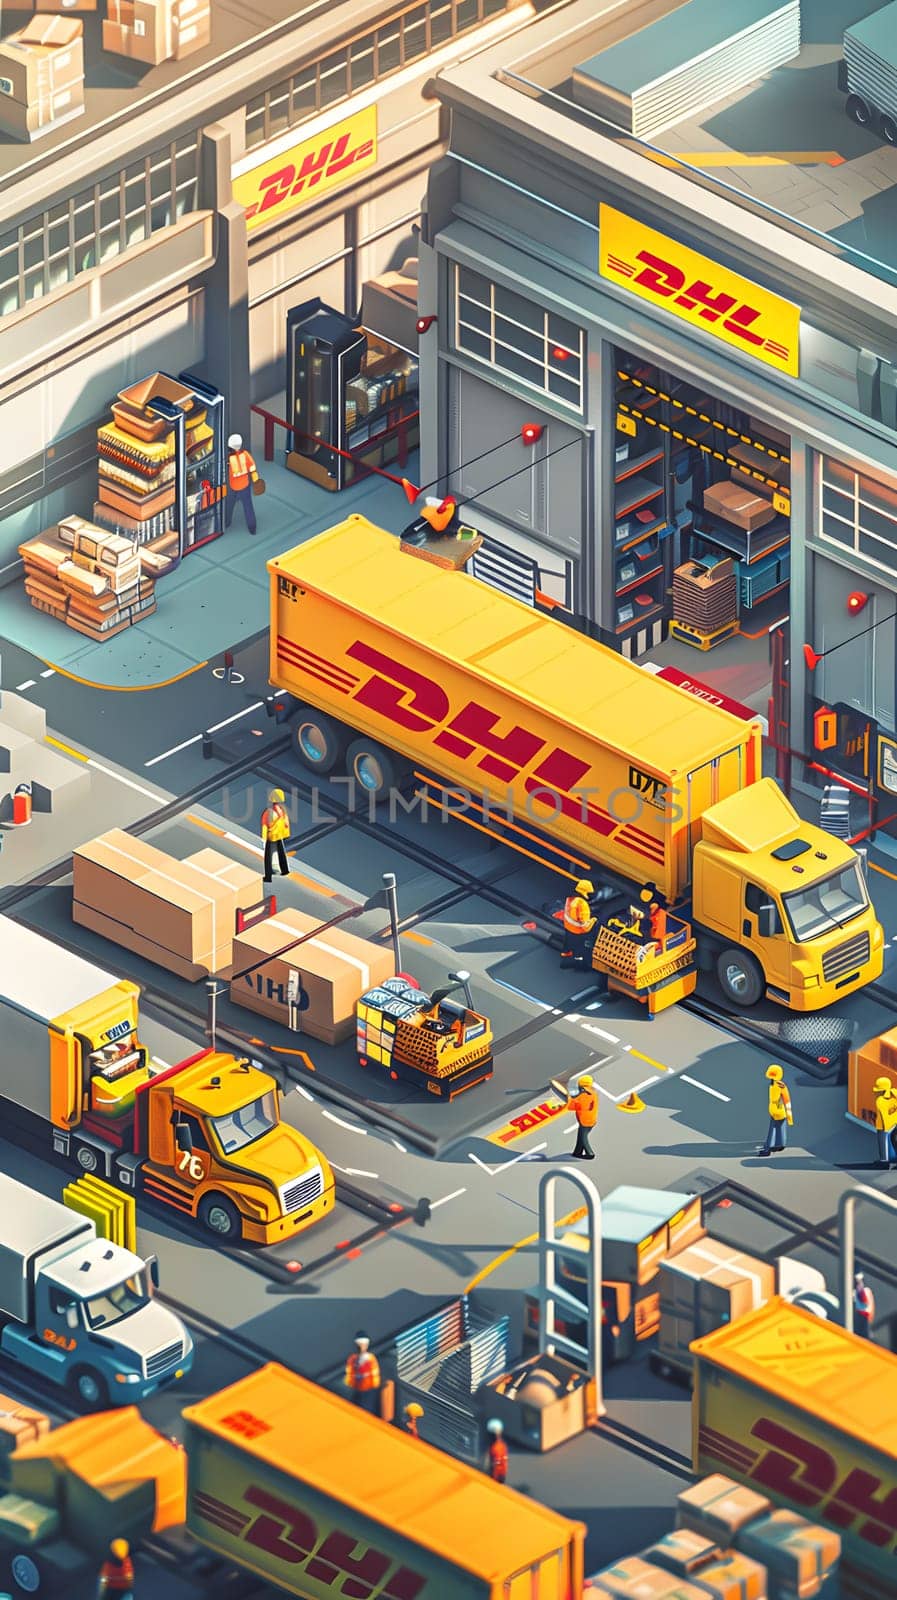 a dhl truck is parked in front of a warehouse by Nadtochiy